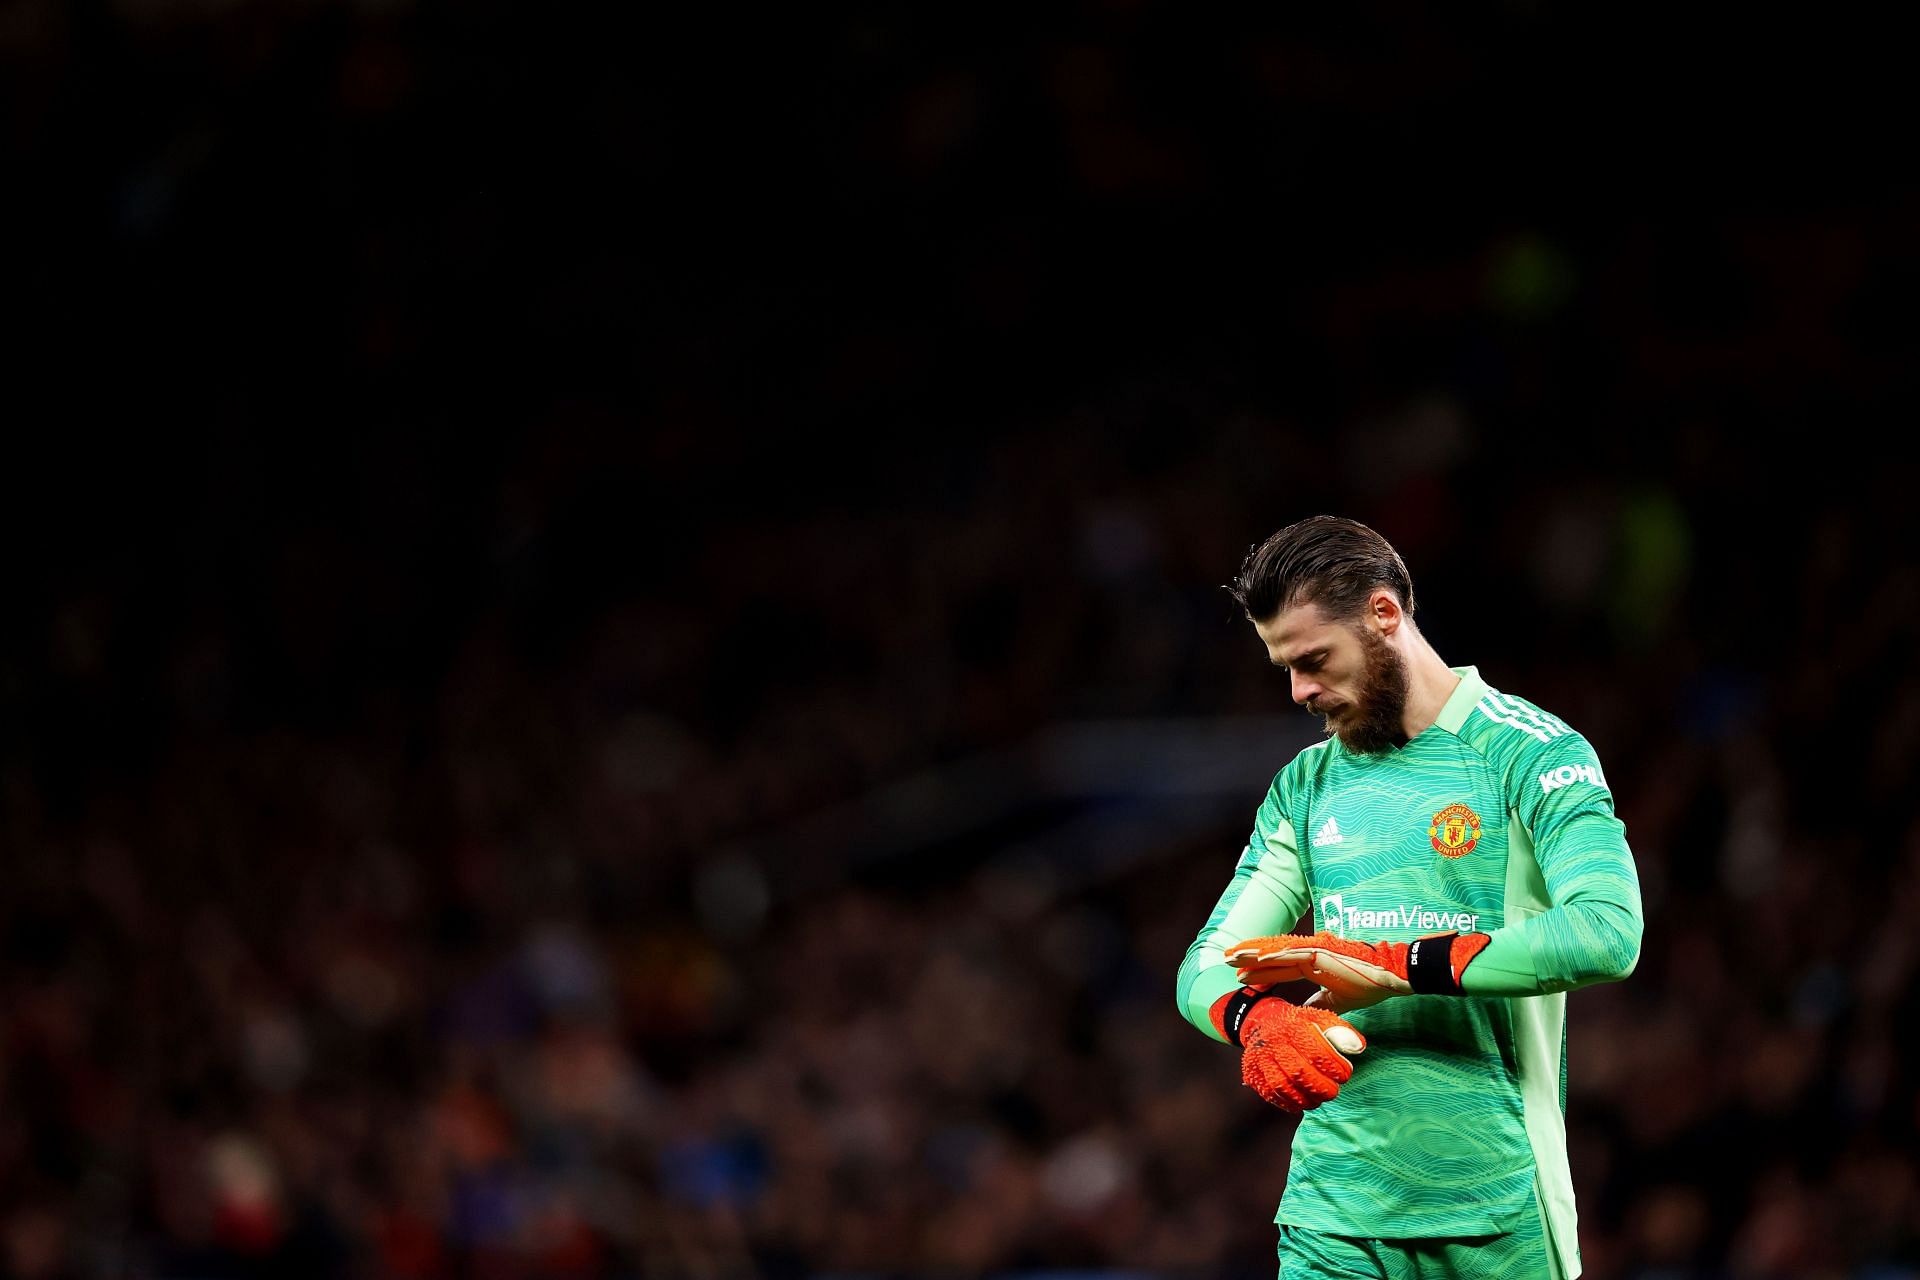 David de Gea is one of the best-paid goalkeepers in the game.